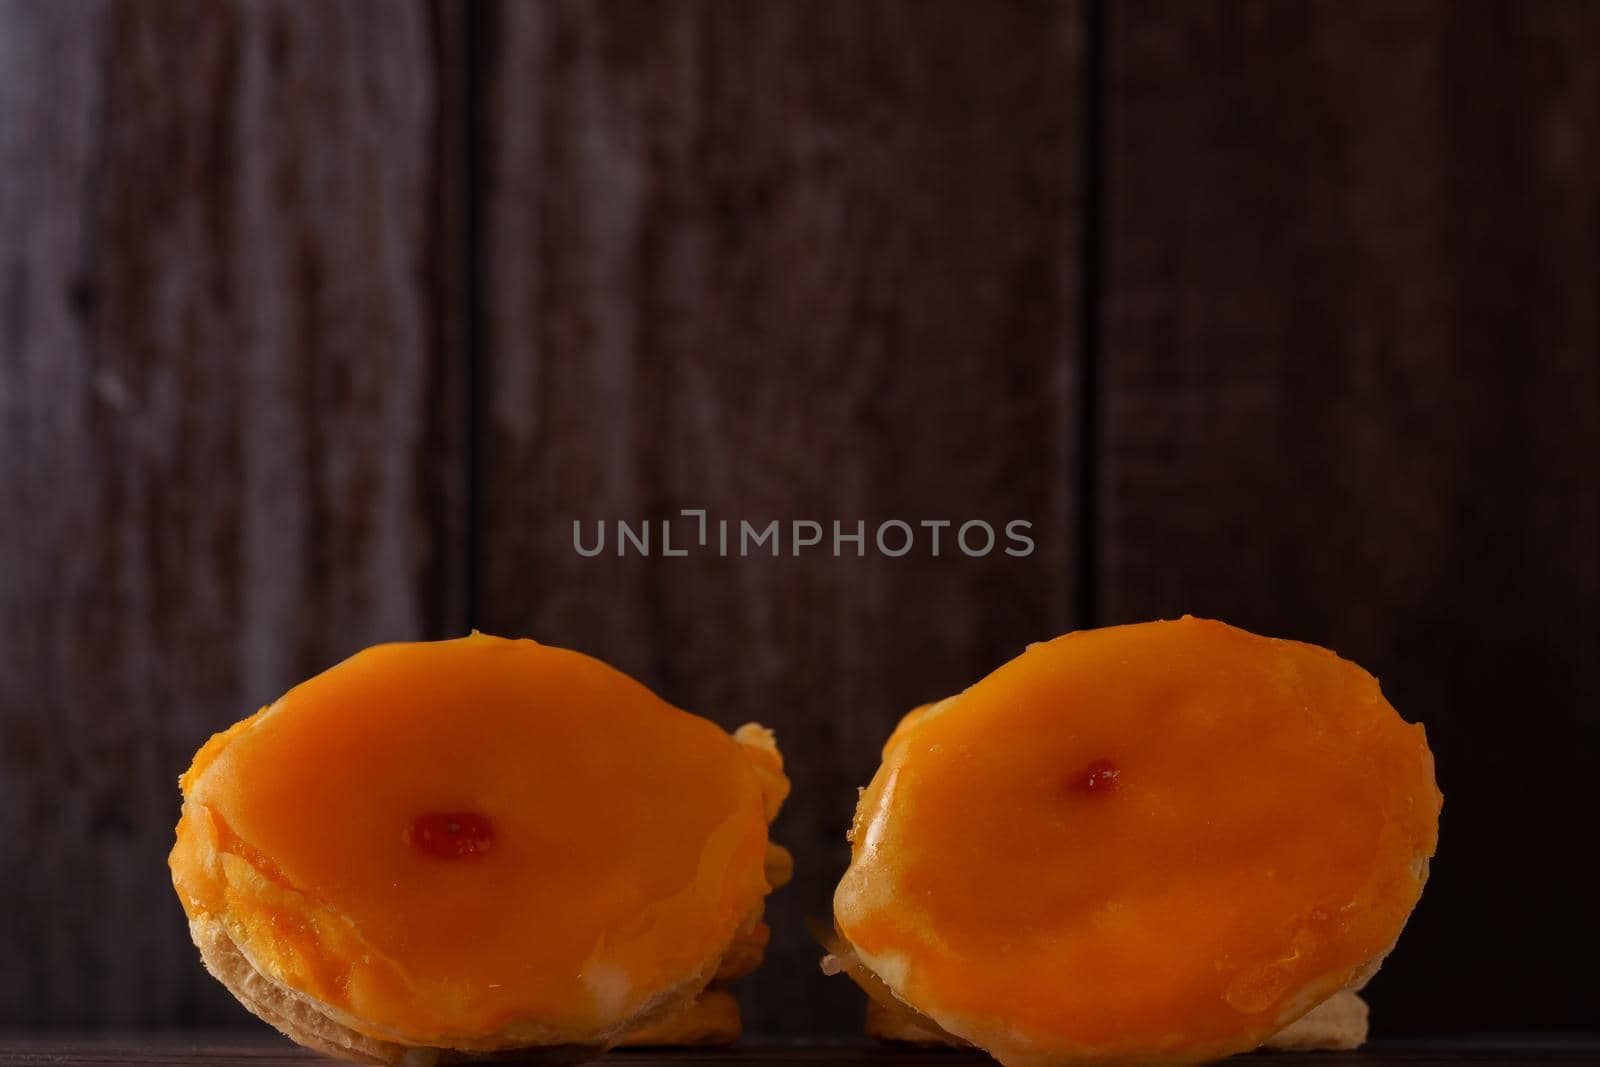 tortas locas or crazy cakes typical from andalucia, spain isolated on a wood background